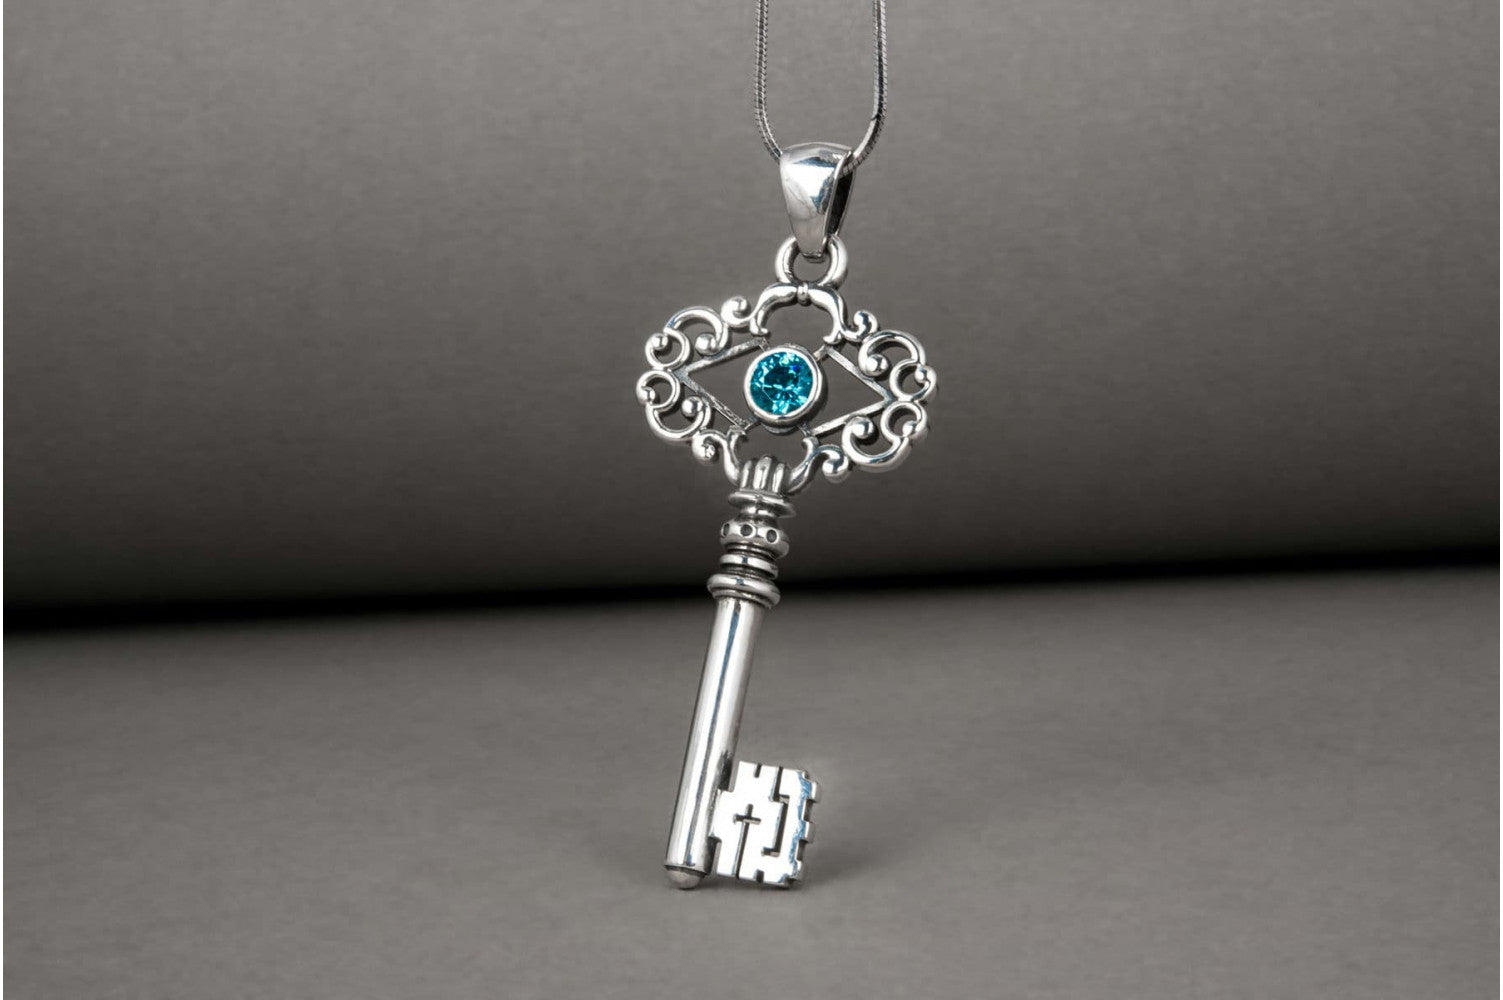 Handmade sterling silver Key pendant with turquoise gem and ornament, unique fashion jewelry - vikingworkshop